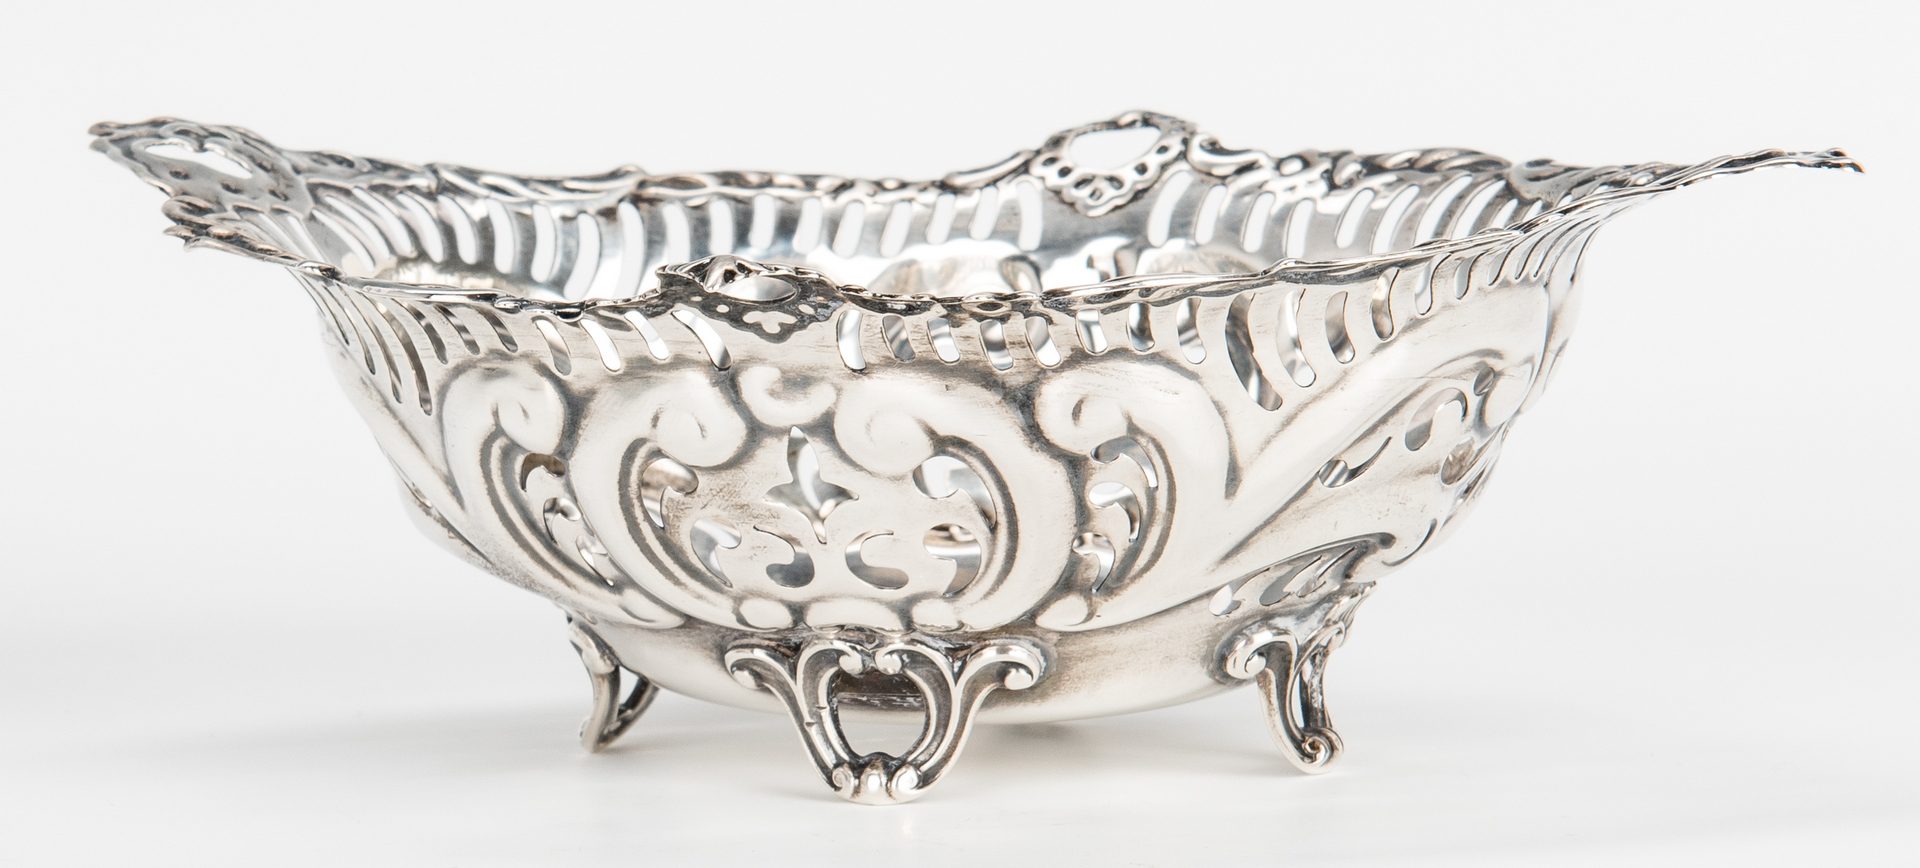 Lot 420: Pairpoint Silver Plateau & Gorham Sterling Nut Dish, 2 items